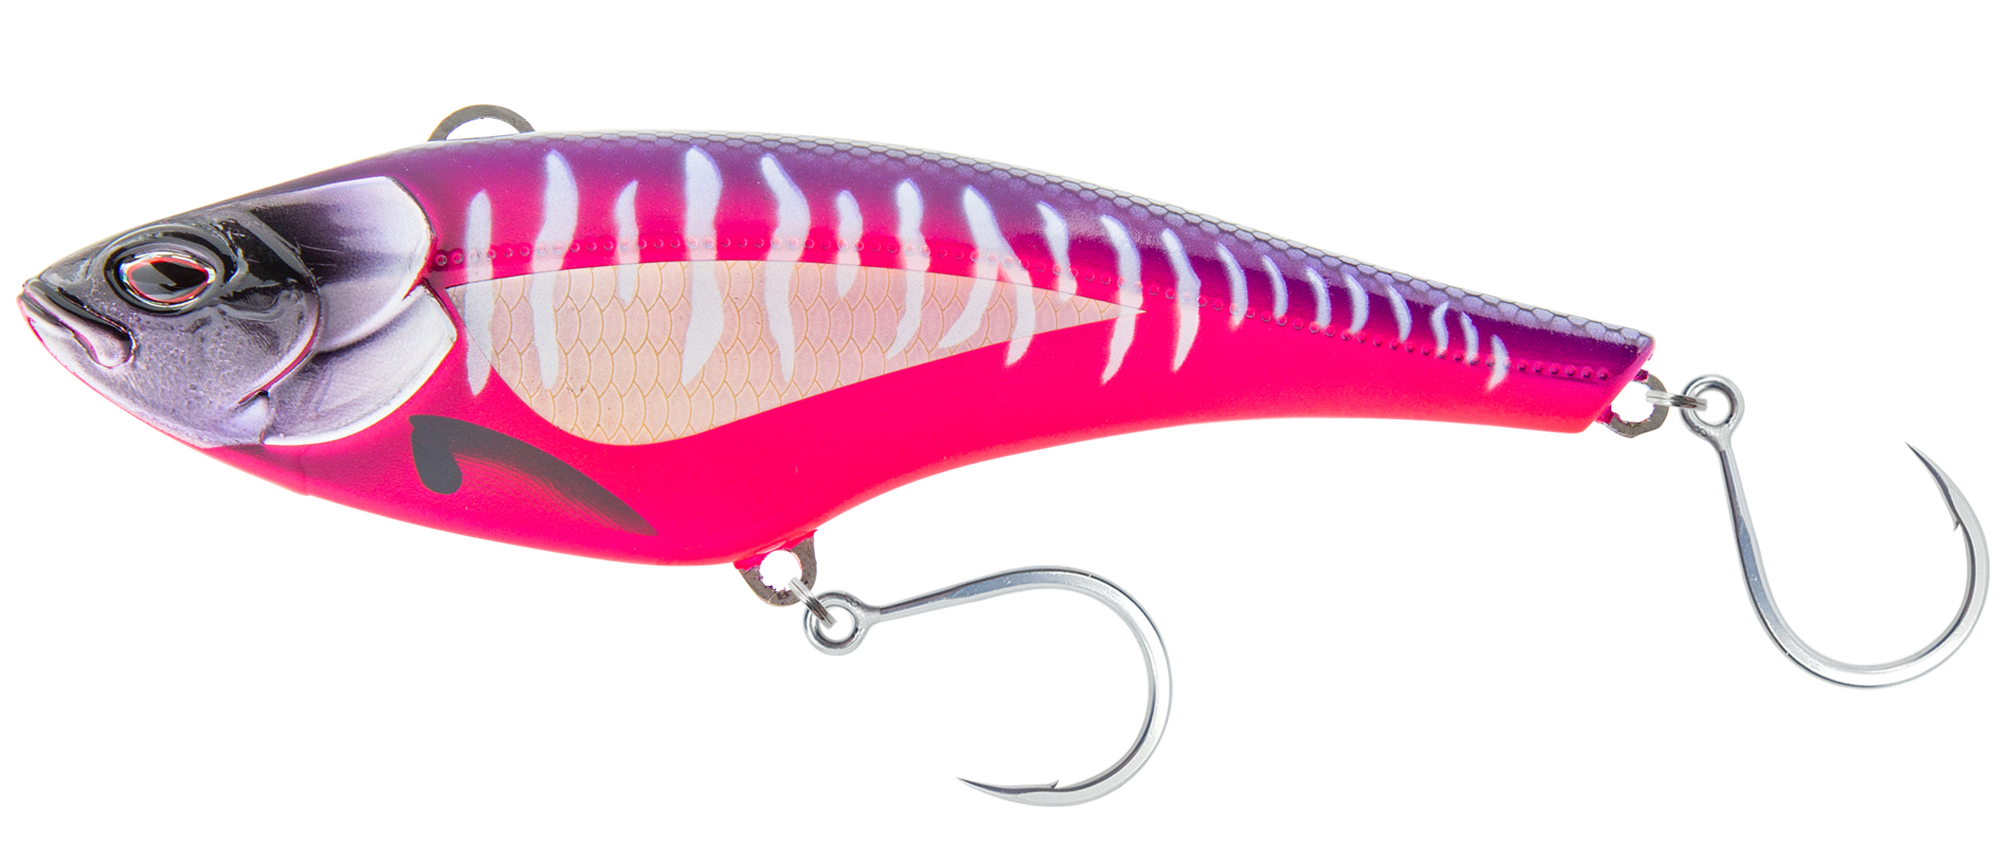 Nomad Madmacs High Speed Mad Hard Body Trolling Lure 240